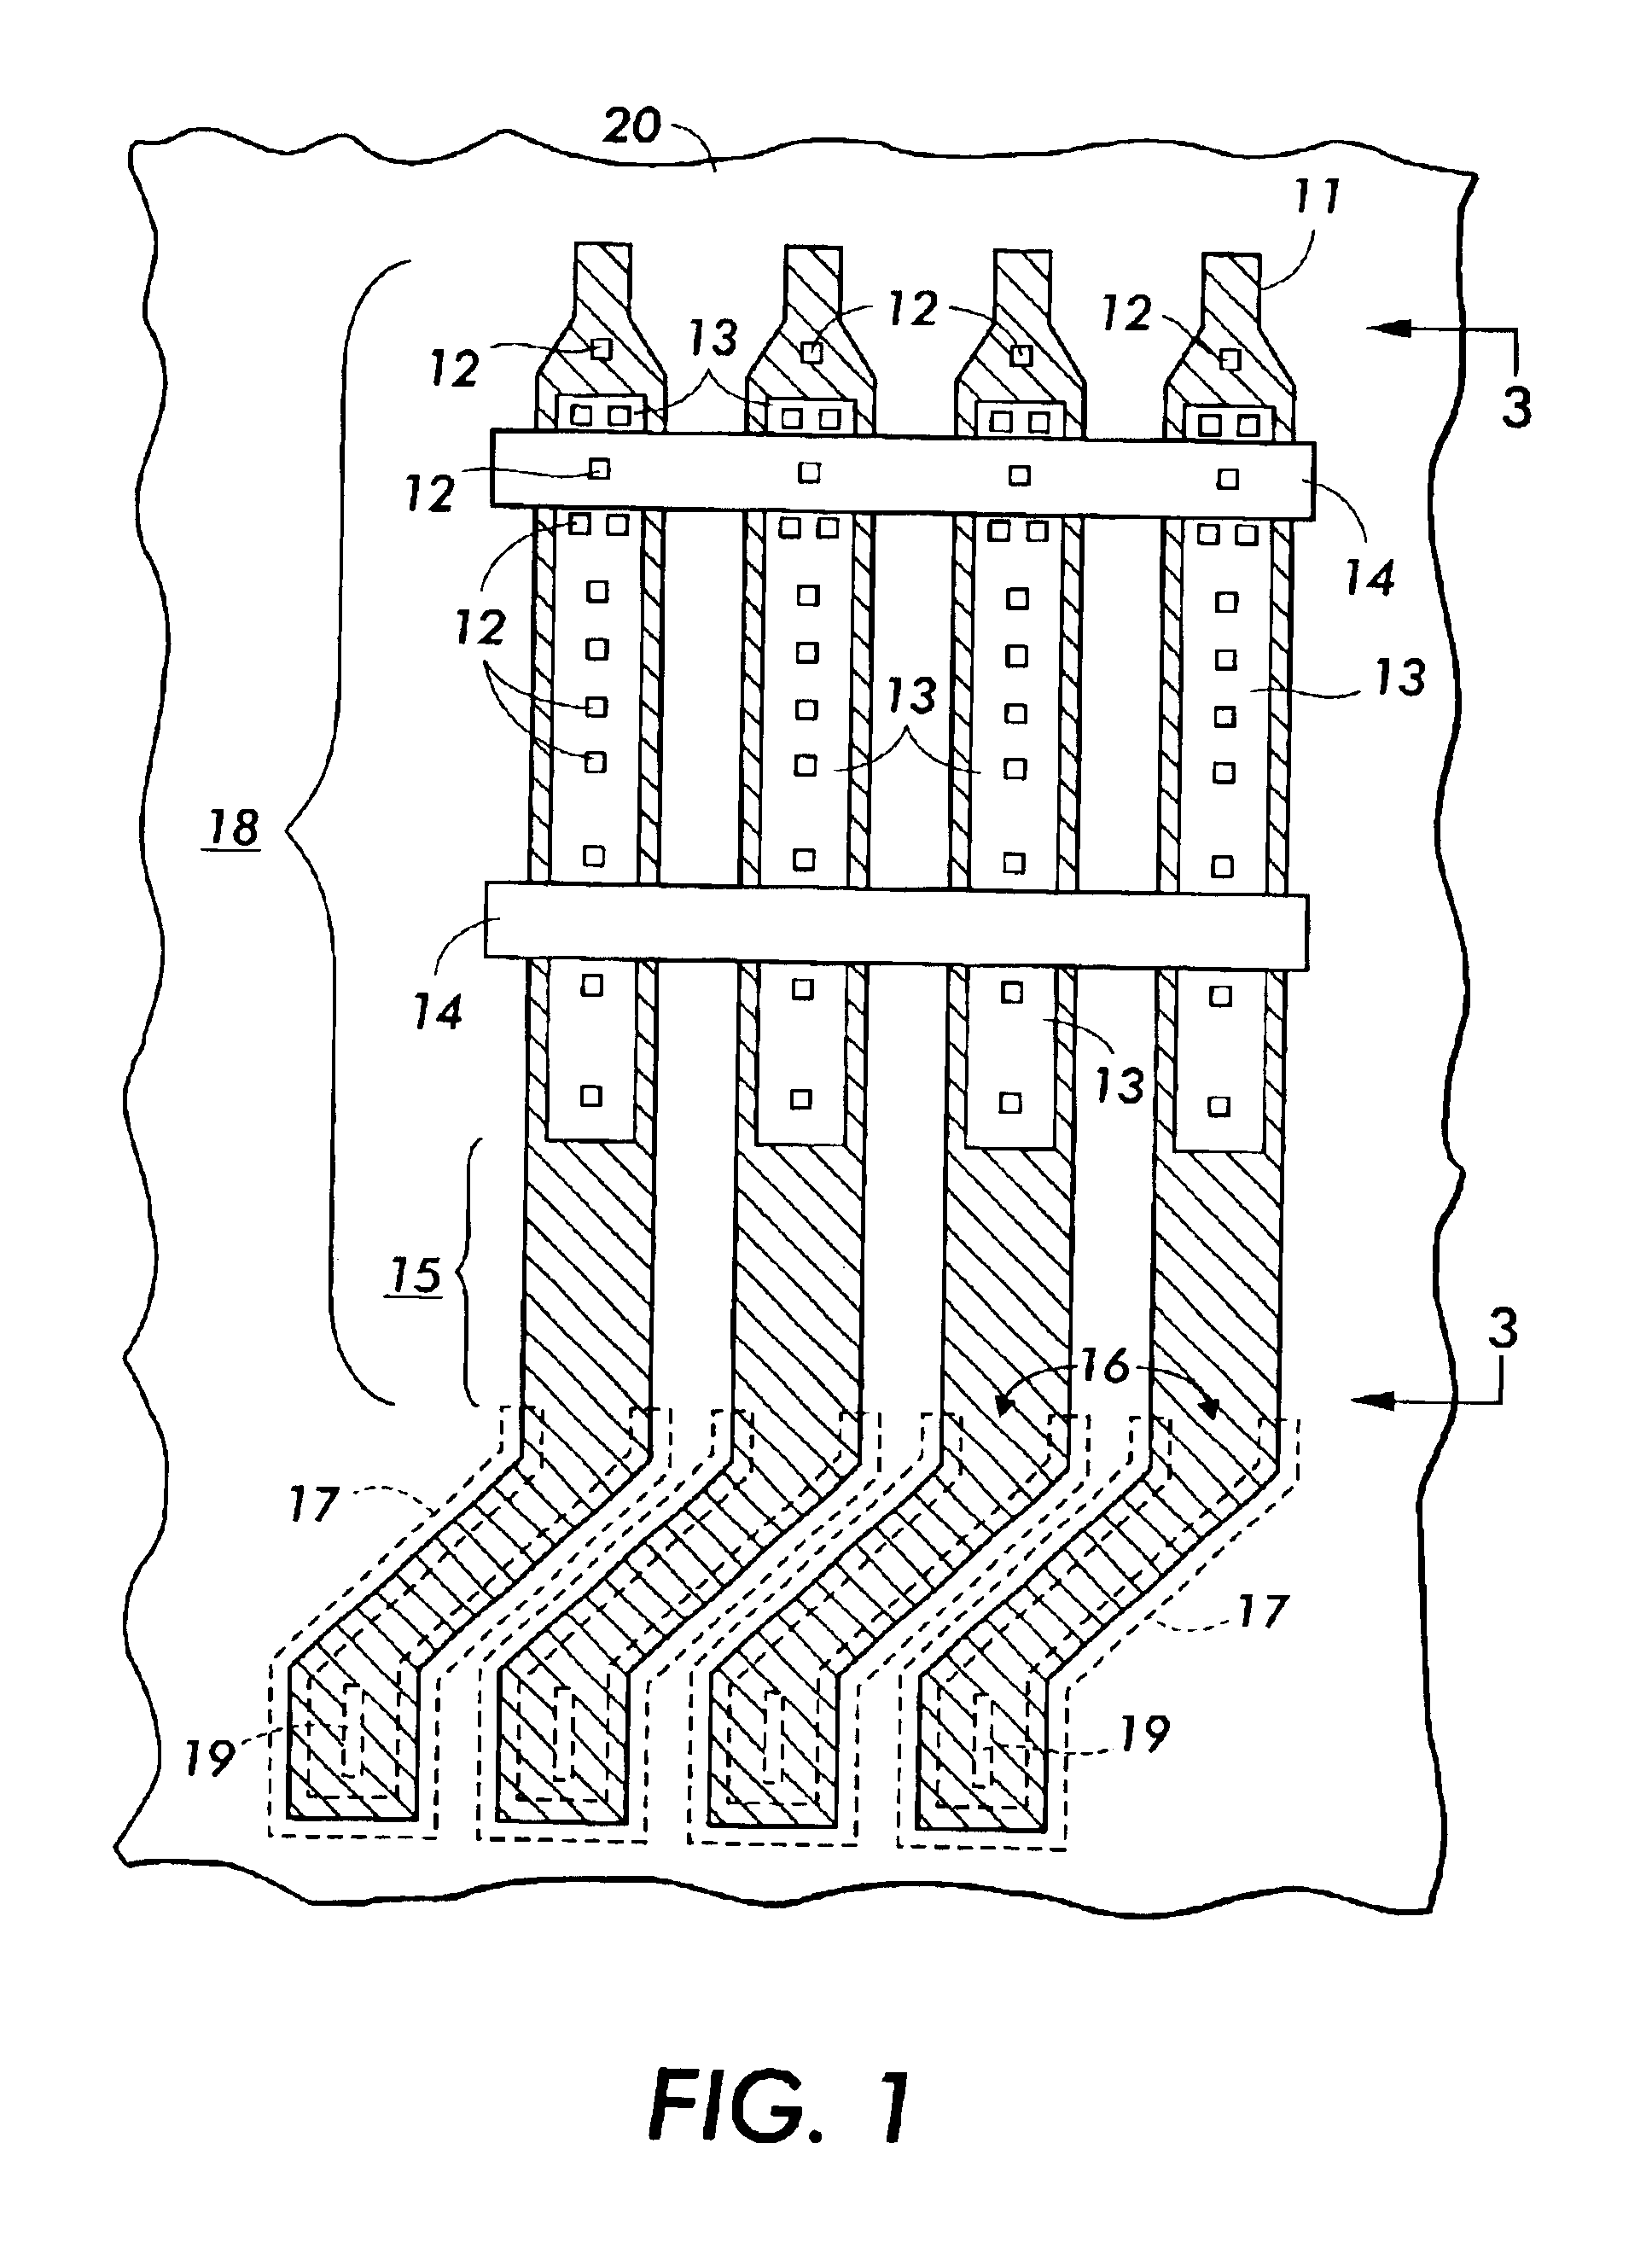 Method of forming an out-of-plane structure